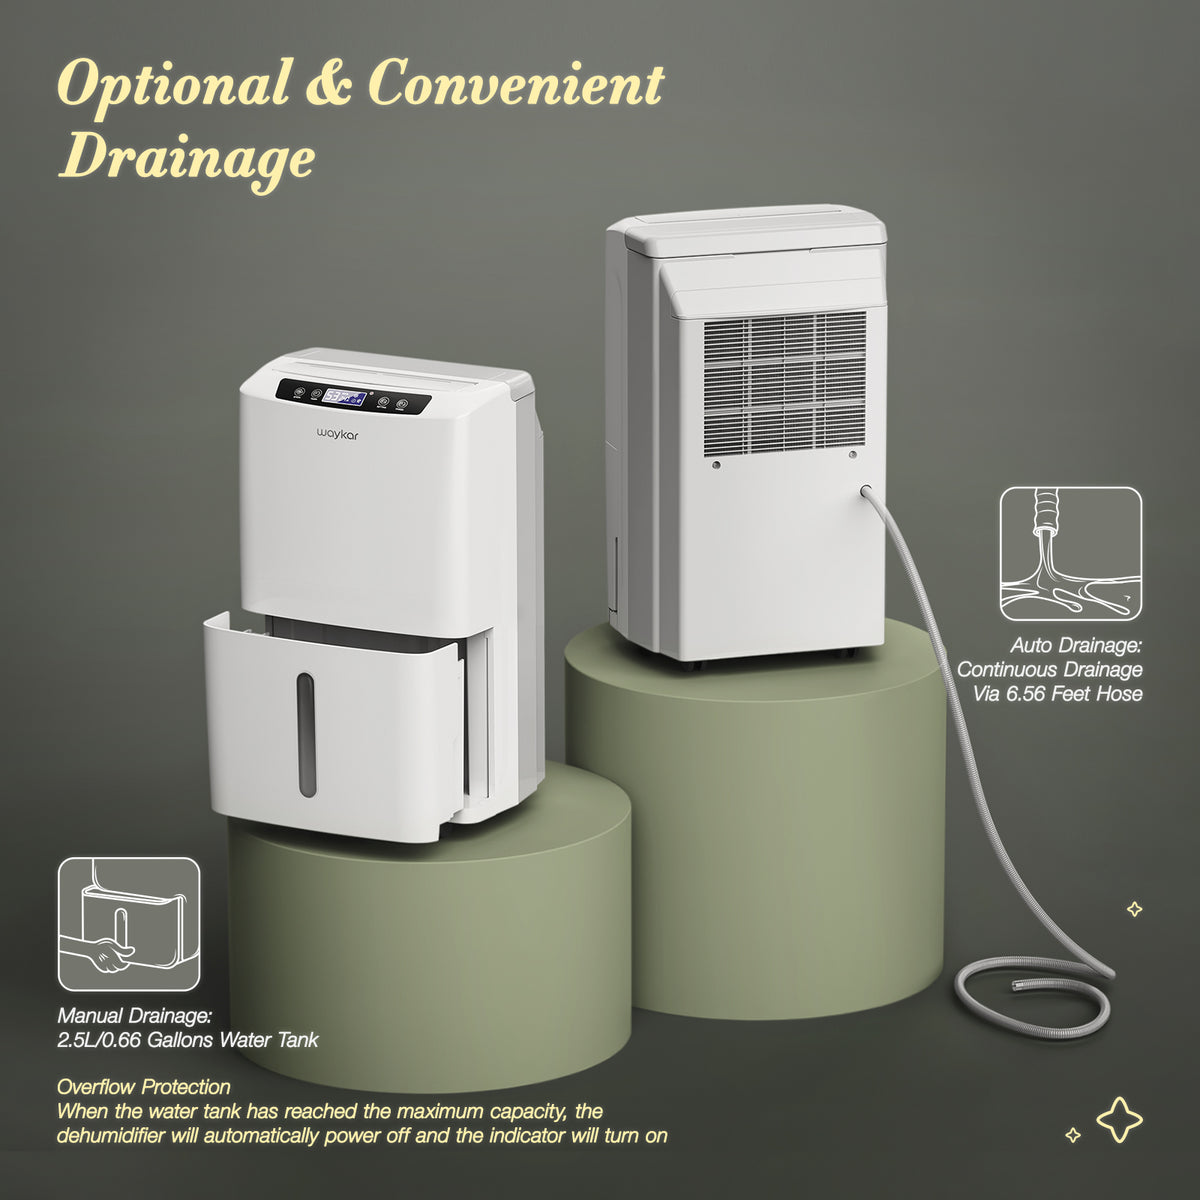 2000 Sq. Ft Dehumidifier for Home and Basements, with Auto or Manual Drainage, 0.66 Gallon Water Tank Capacity